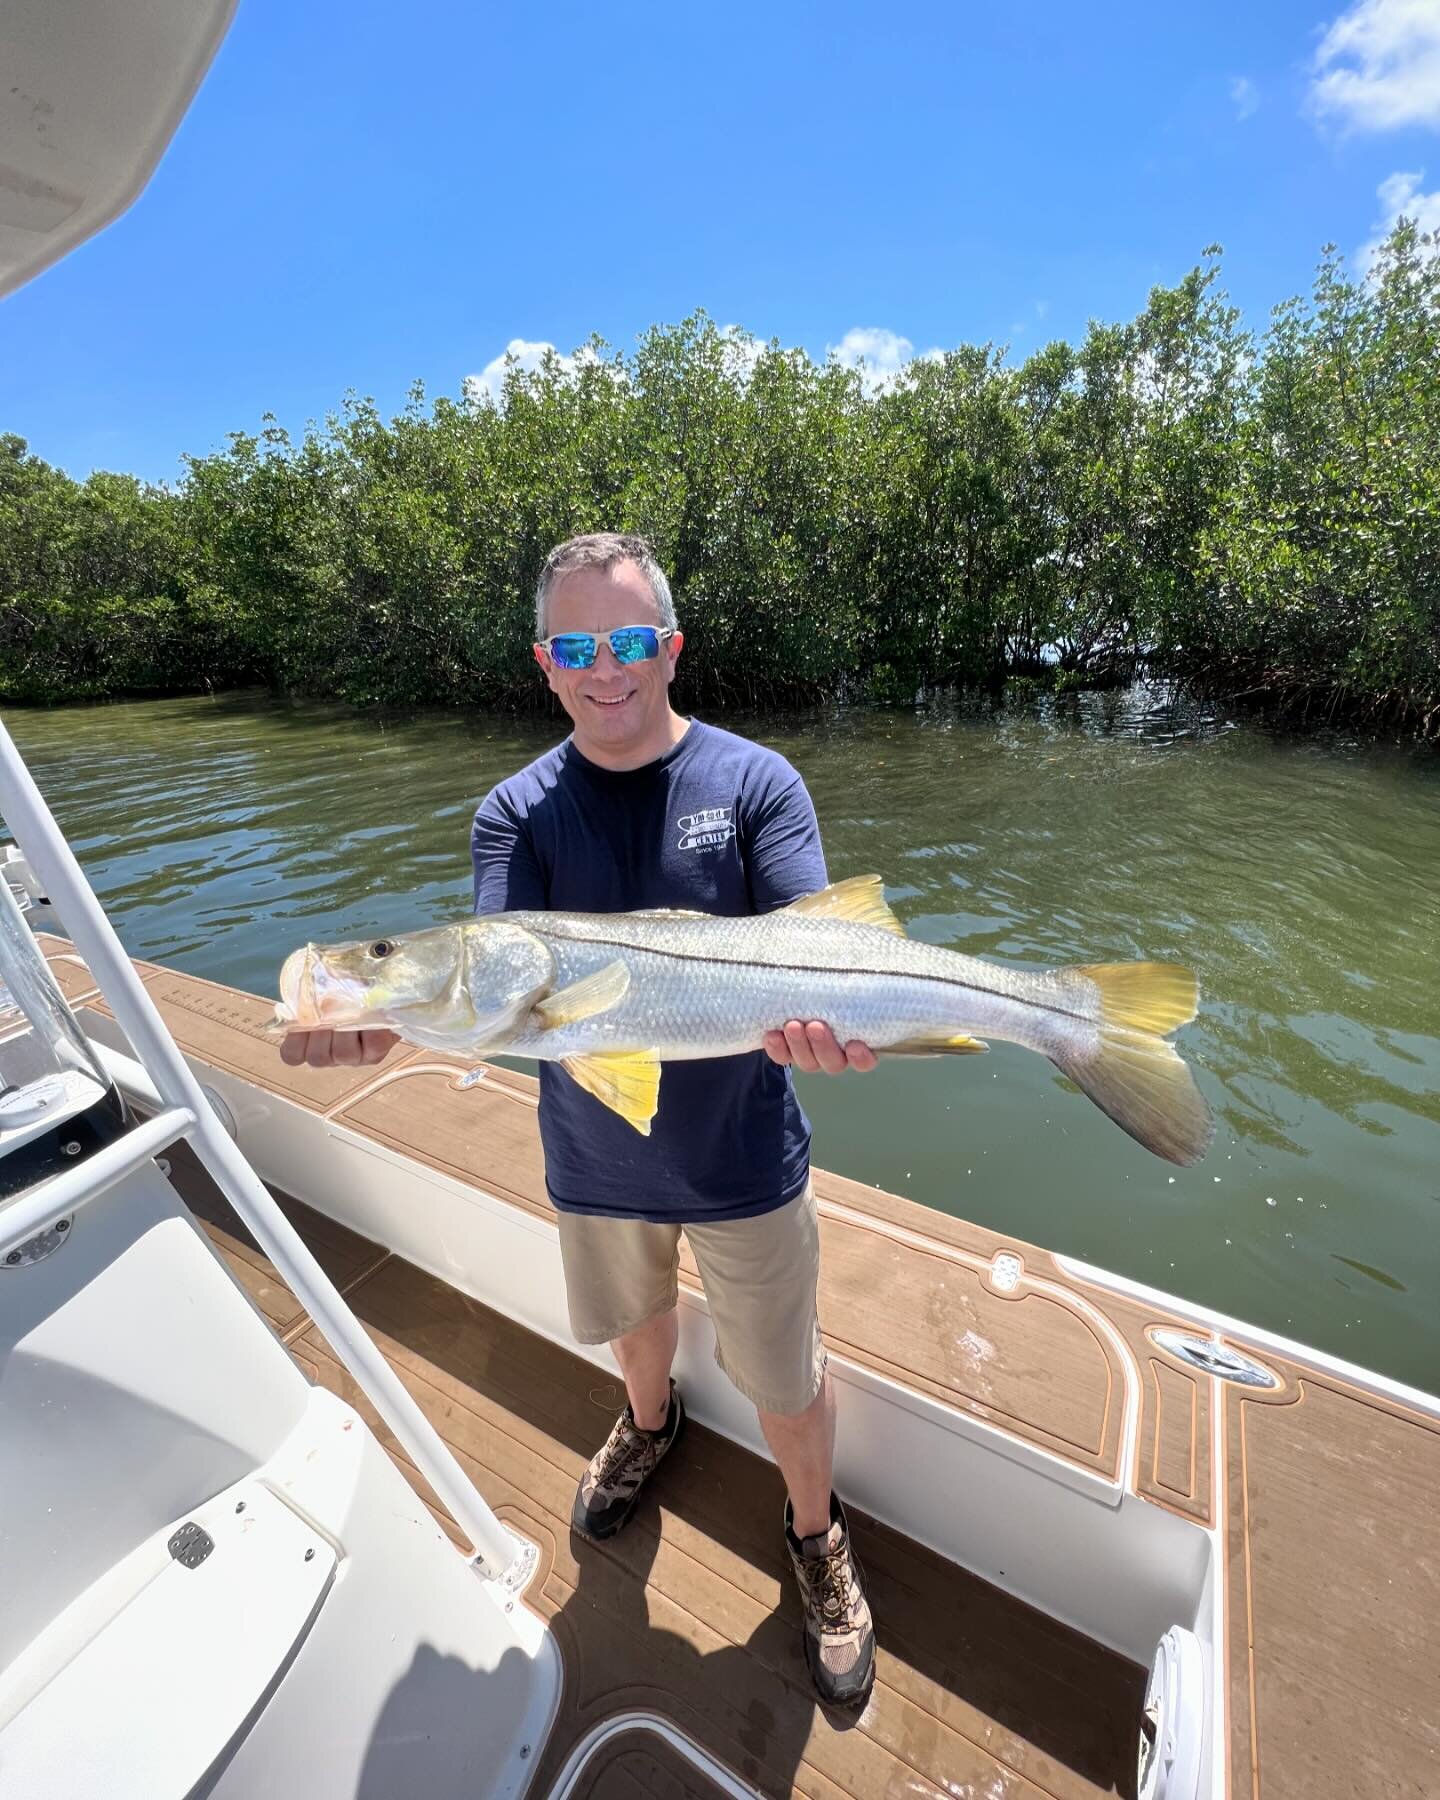 Check out this February snook! High winds led us to fish new spots this morning. Thankfully, we still managed to fill the cooler with some sheep and successfully caught and released a 22-inch trout!

#fishtheburgcharters #stpetersburg #snookfishing #